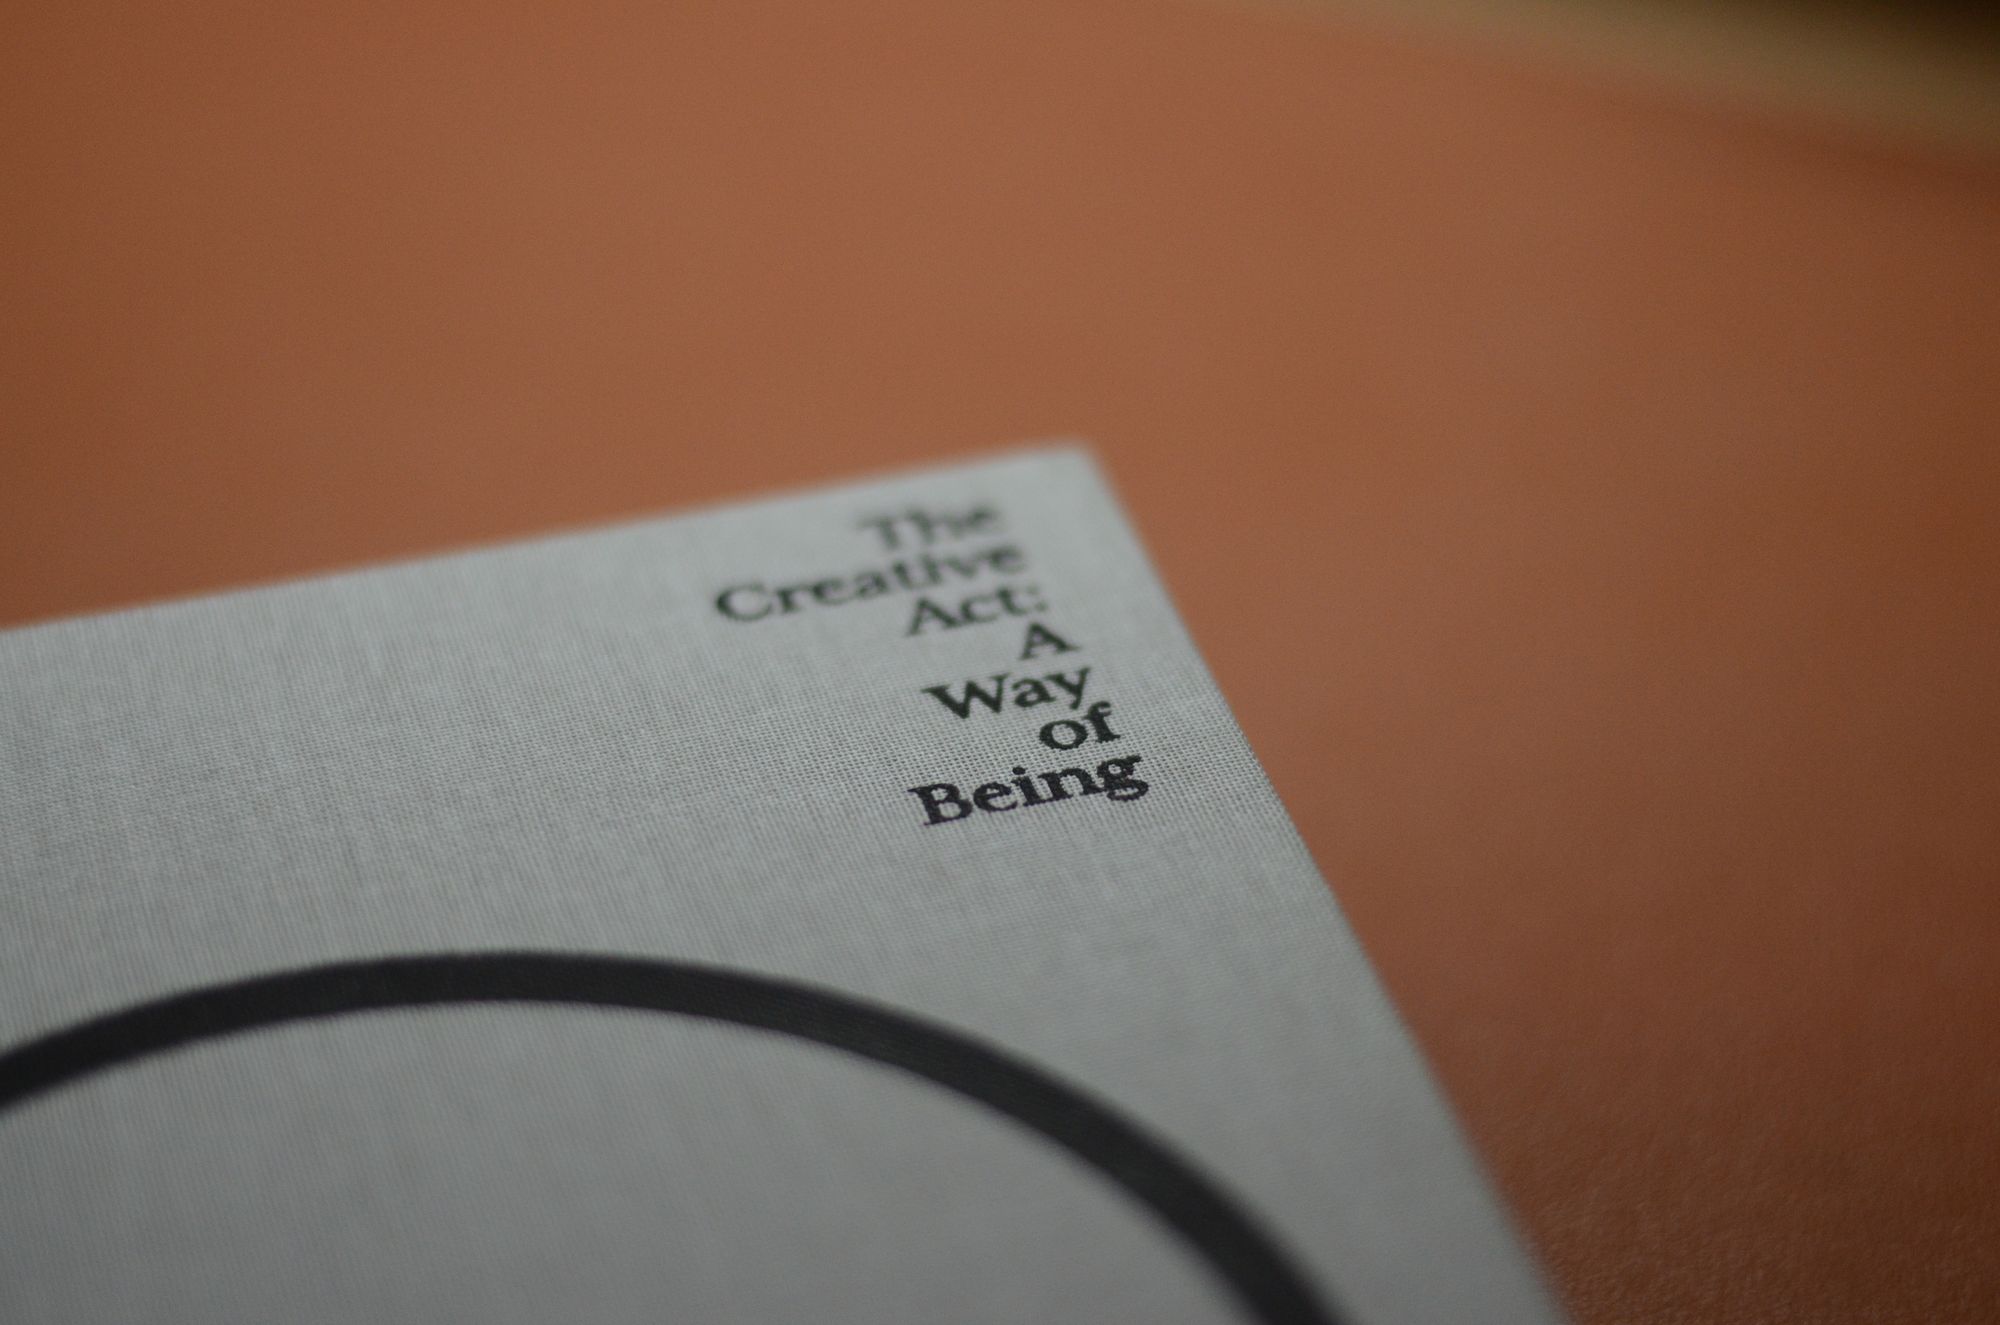 currently reading 'The Creative Act: A Way of Being' by Rick Rubin & i